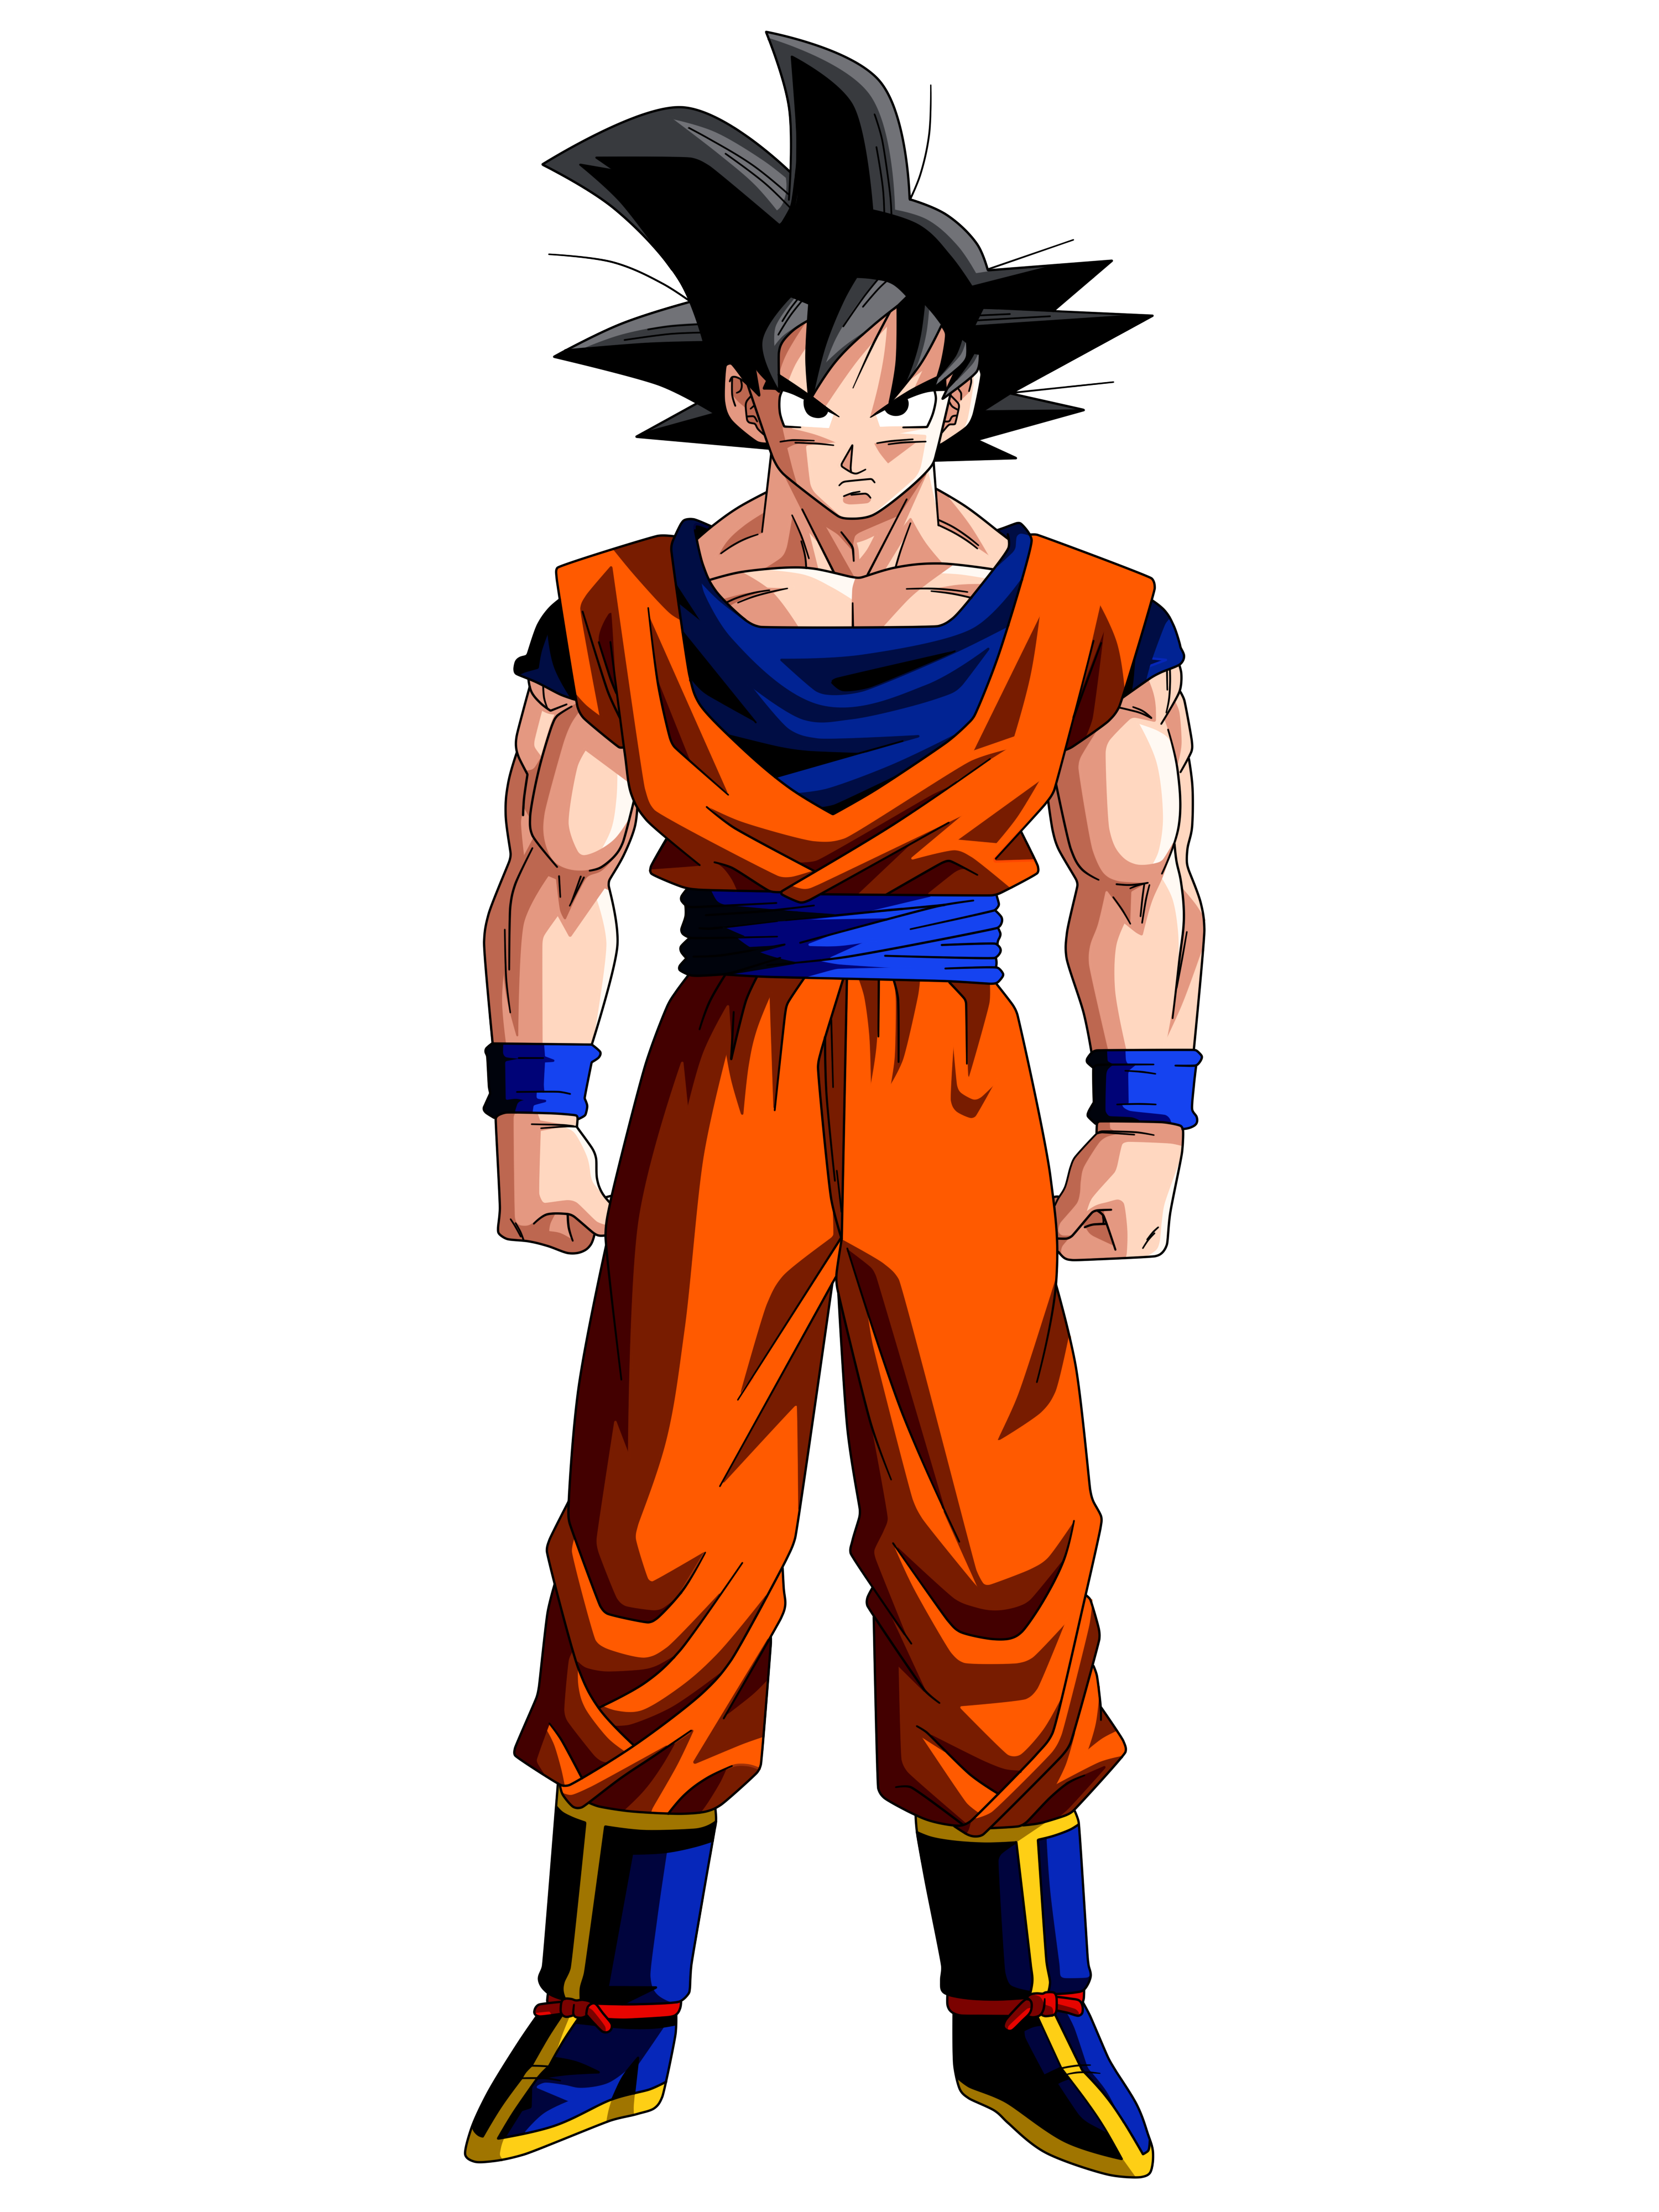 http://images1.wikia.nocookie.net/__cb20120515133536/dragonball/es/images/4/4f/Goku_dbz_fin.png